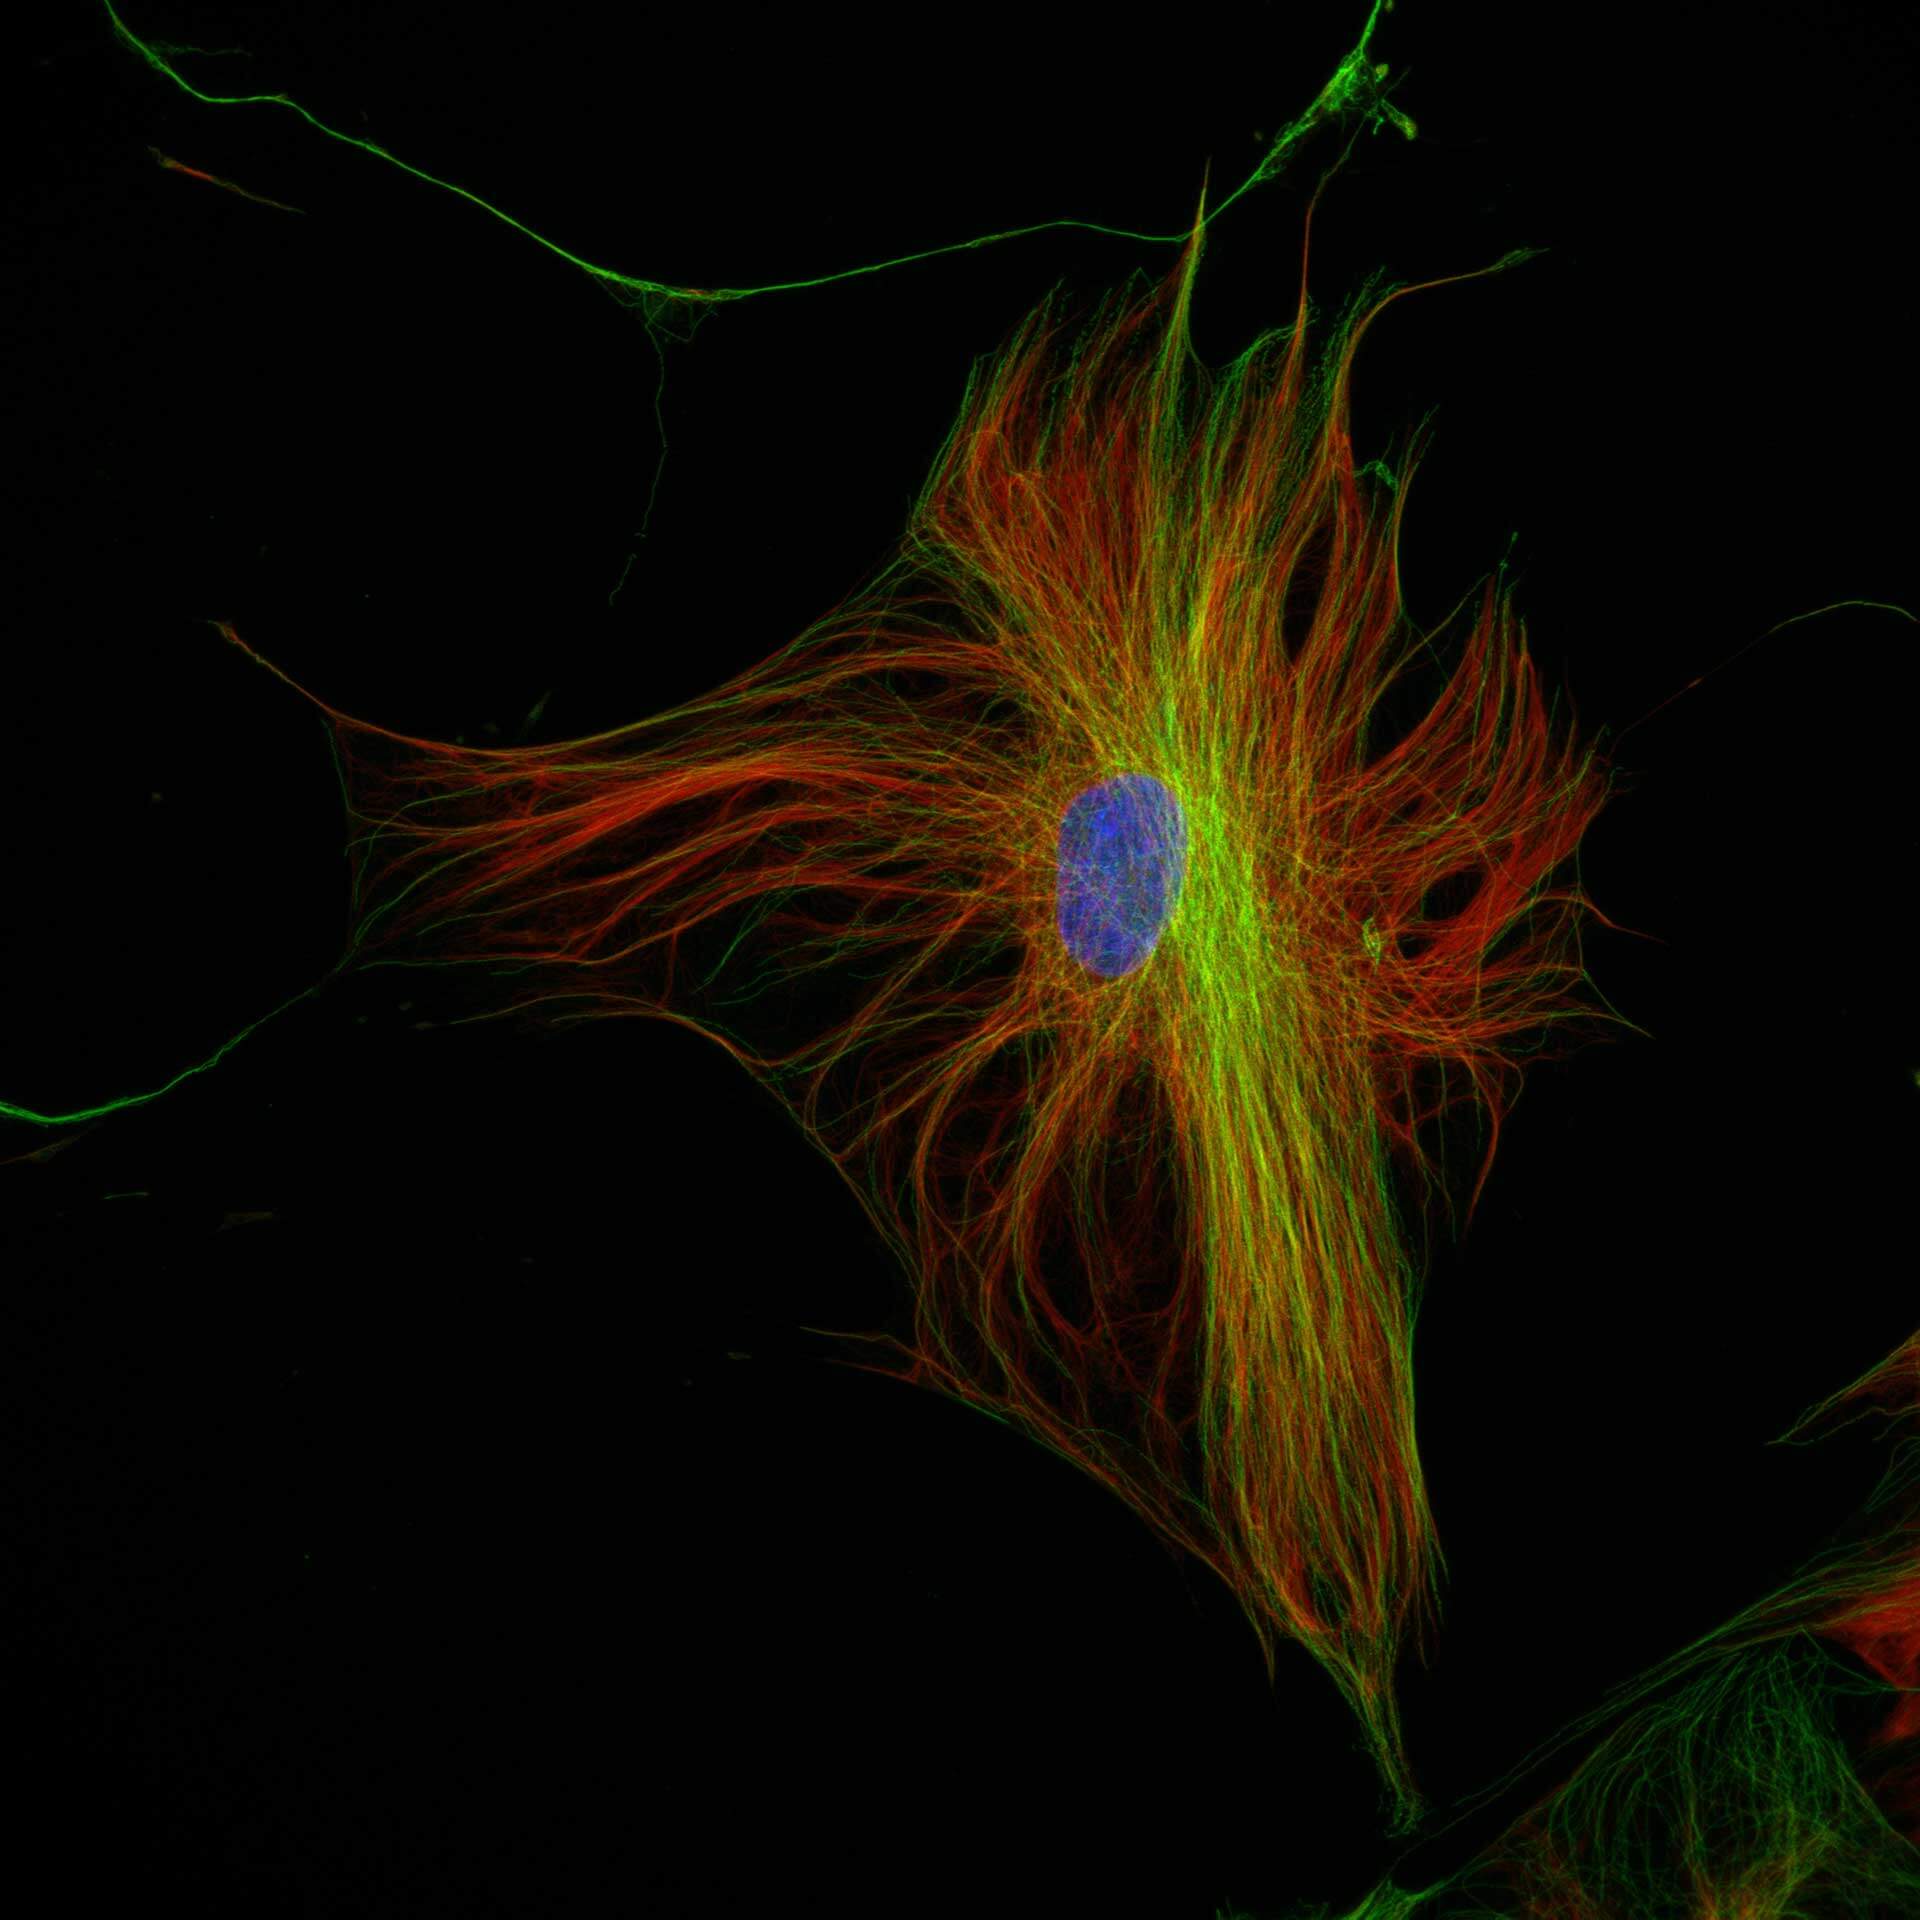 Three color confocal image of human fibroblast immunostained with abberior STAR 580 for vimentin (green) and with abberior STAR RED for tubulin (red).